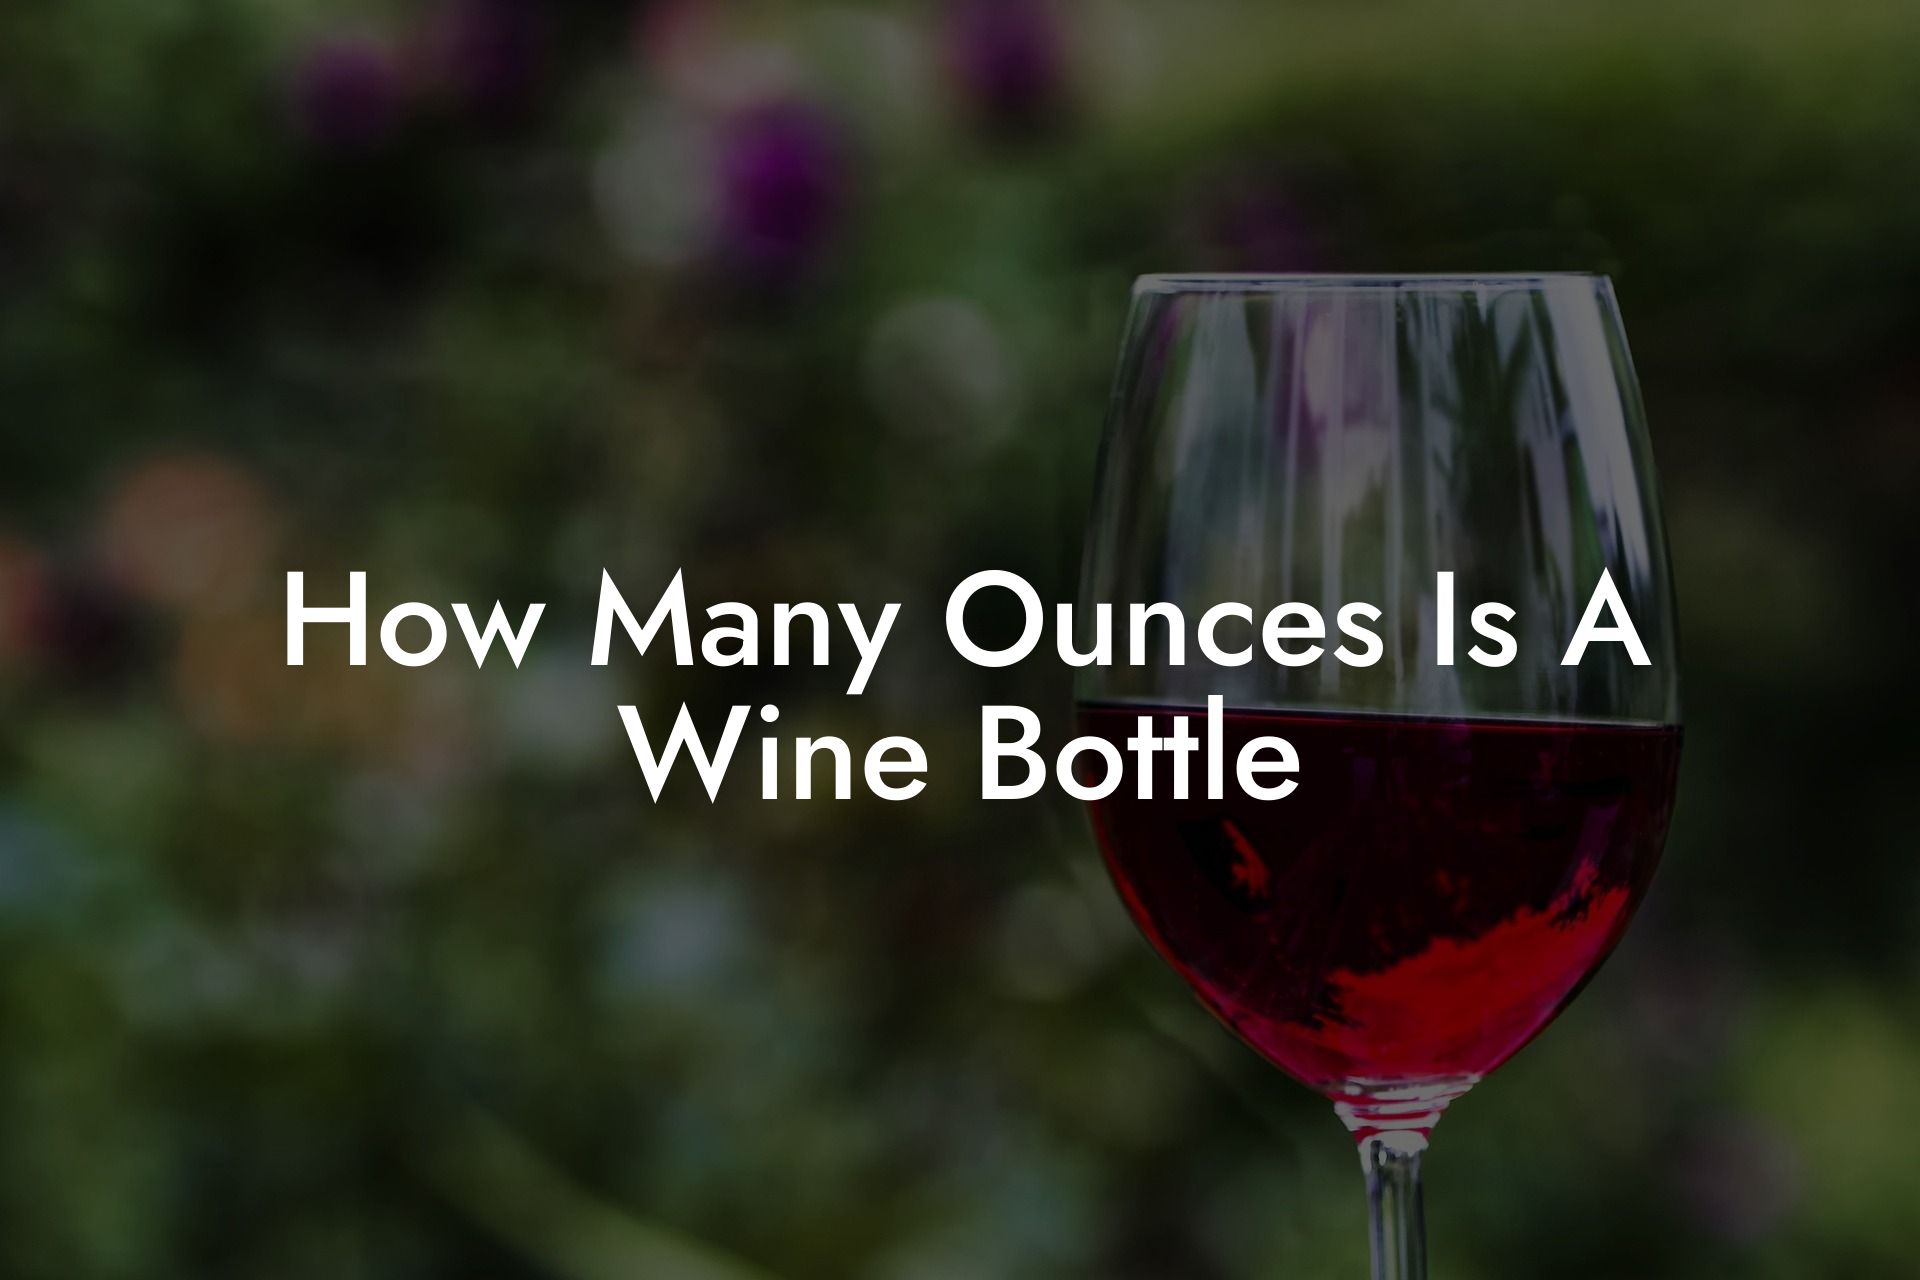 How Many Ounces Is A Wine Bottle